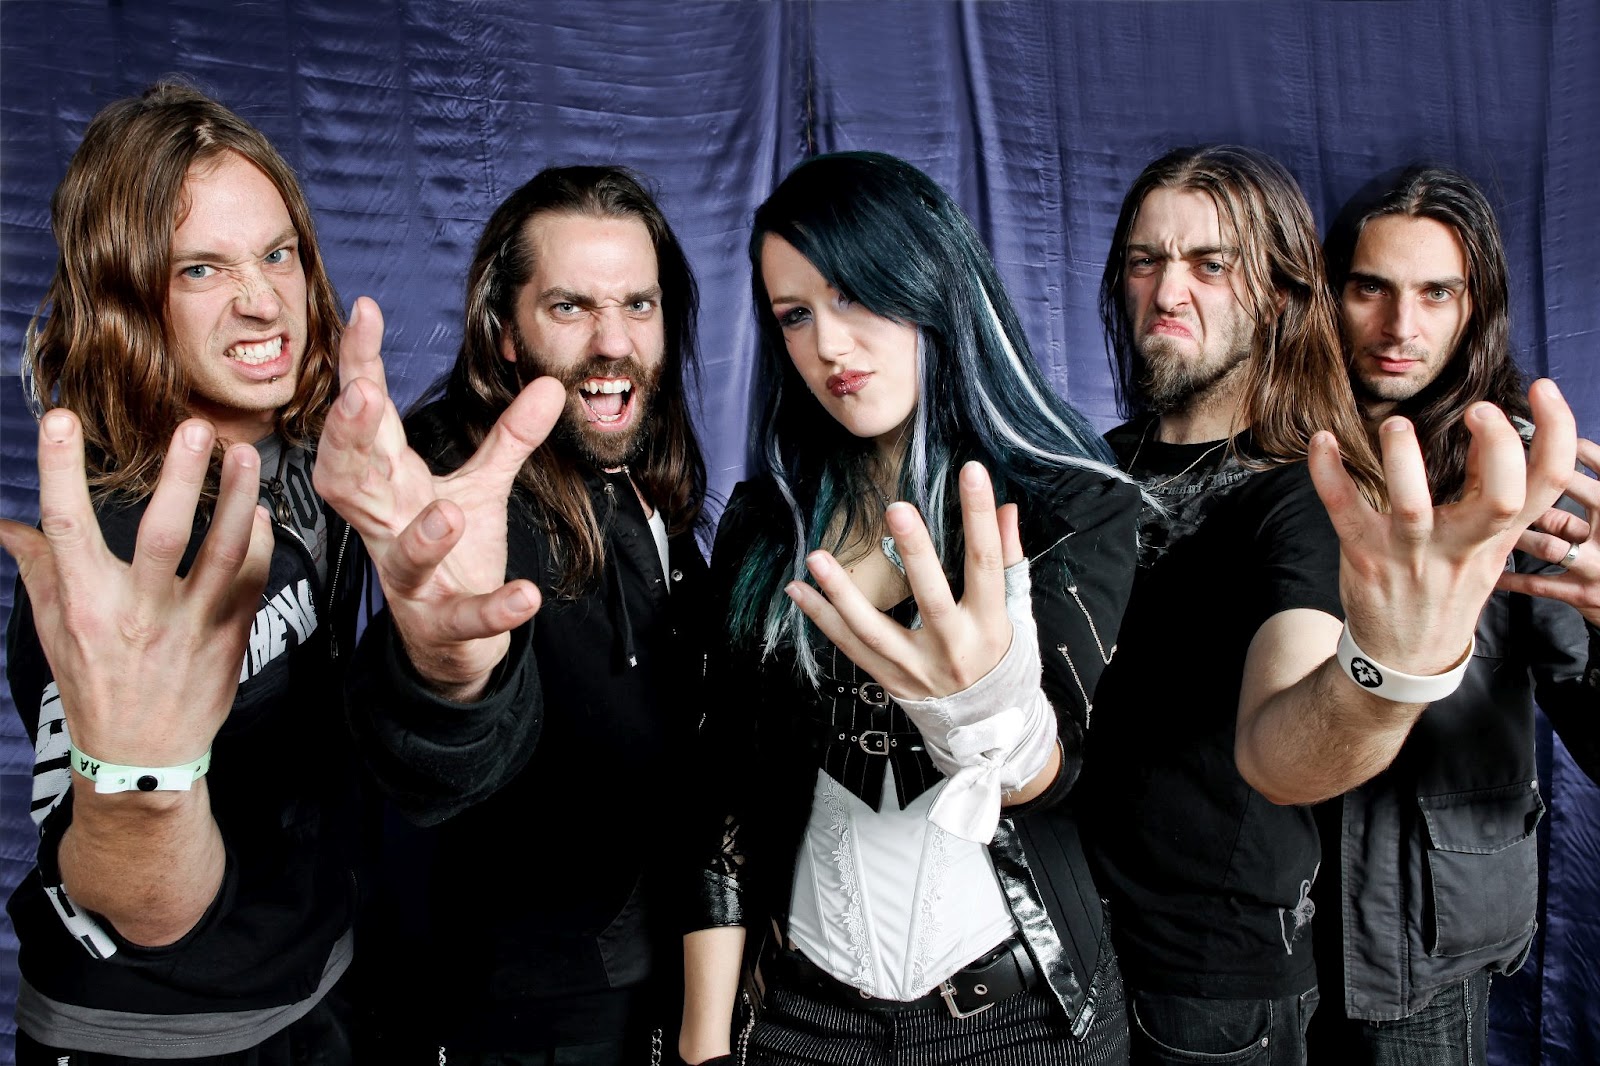 the agonist 1600 x 900 the agonist 3422 x 2429